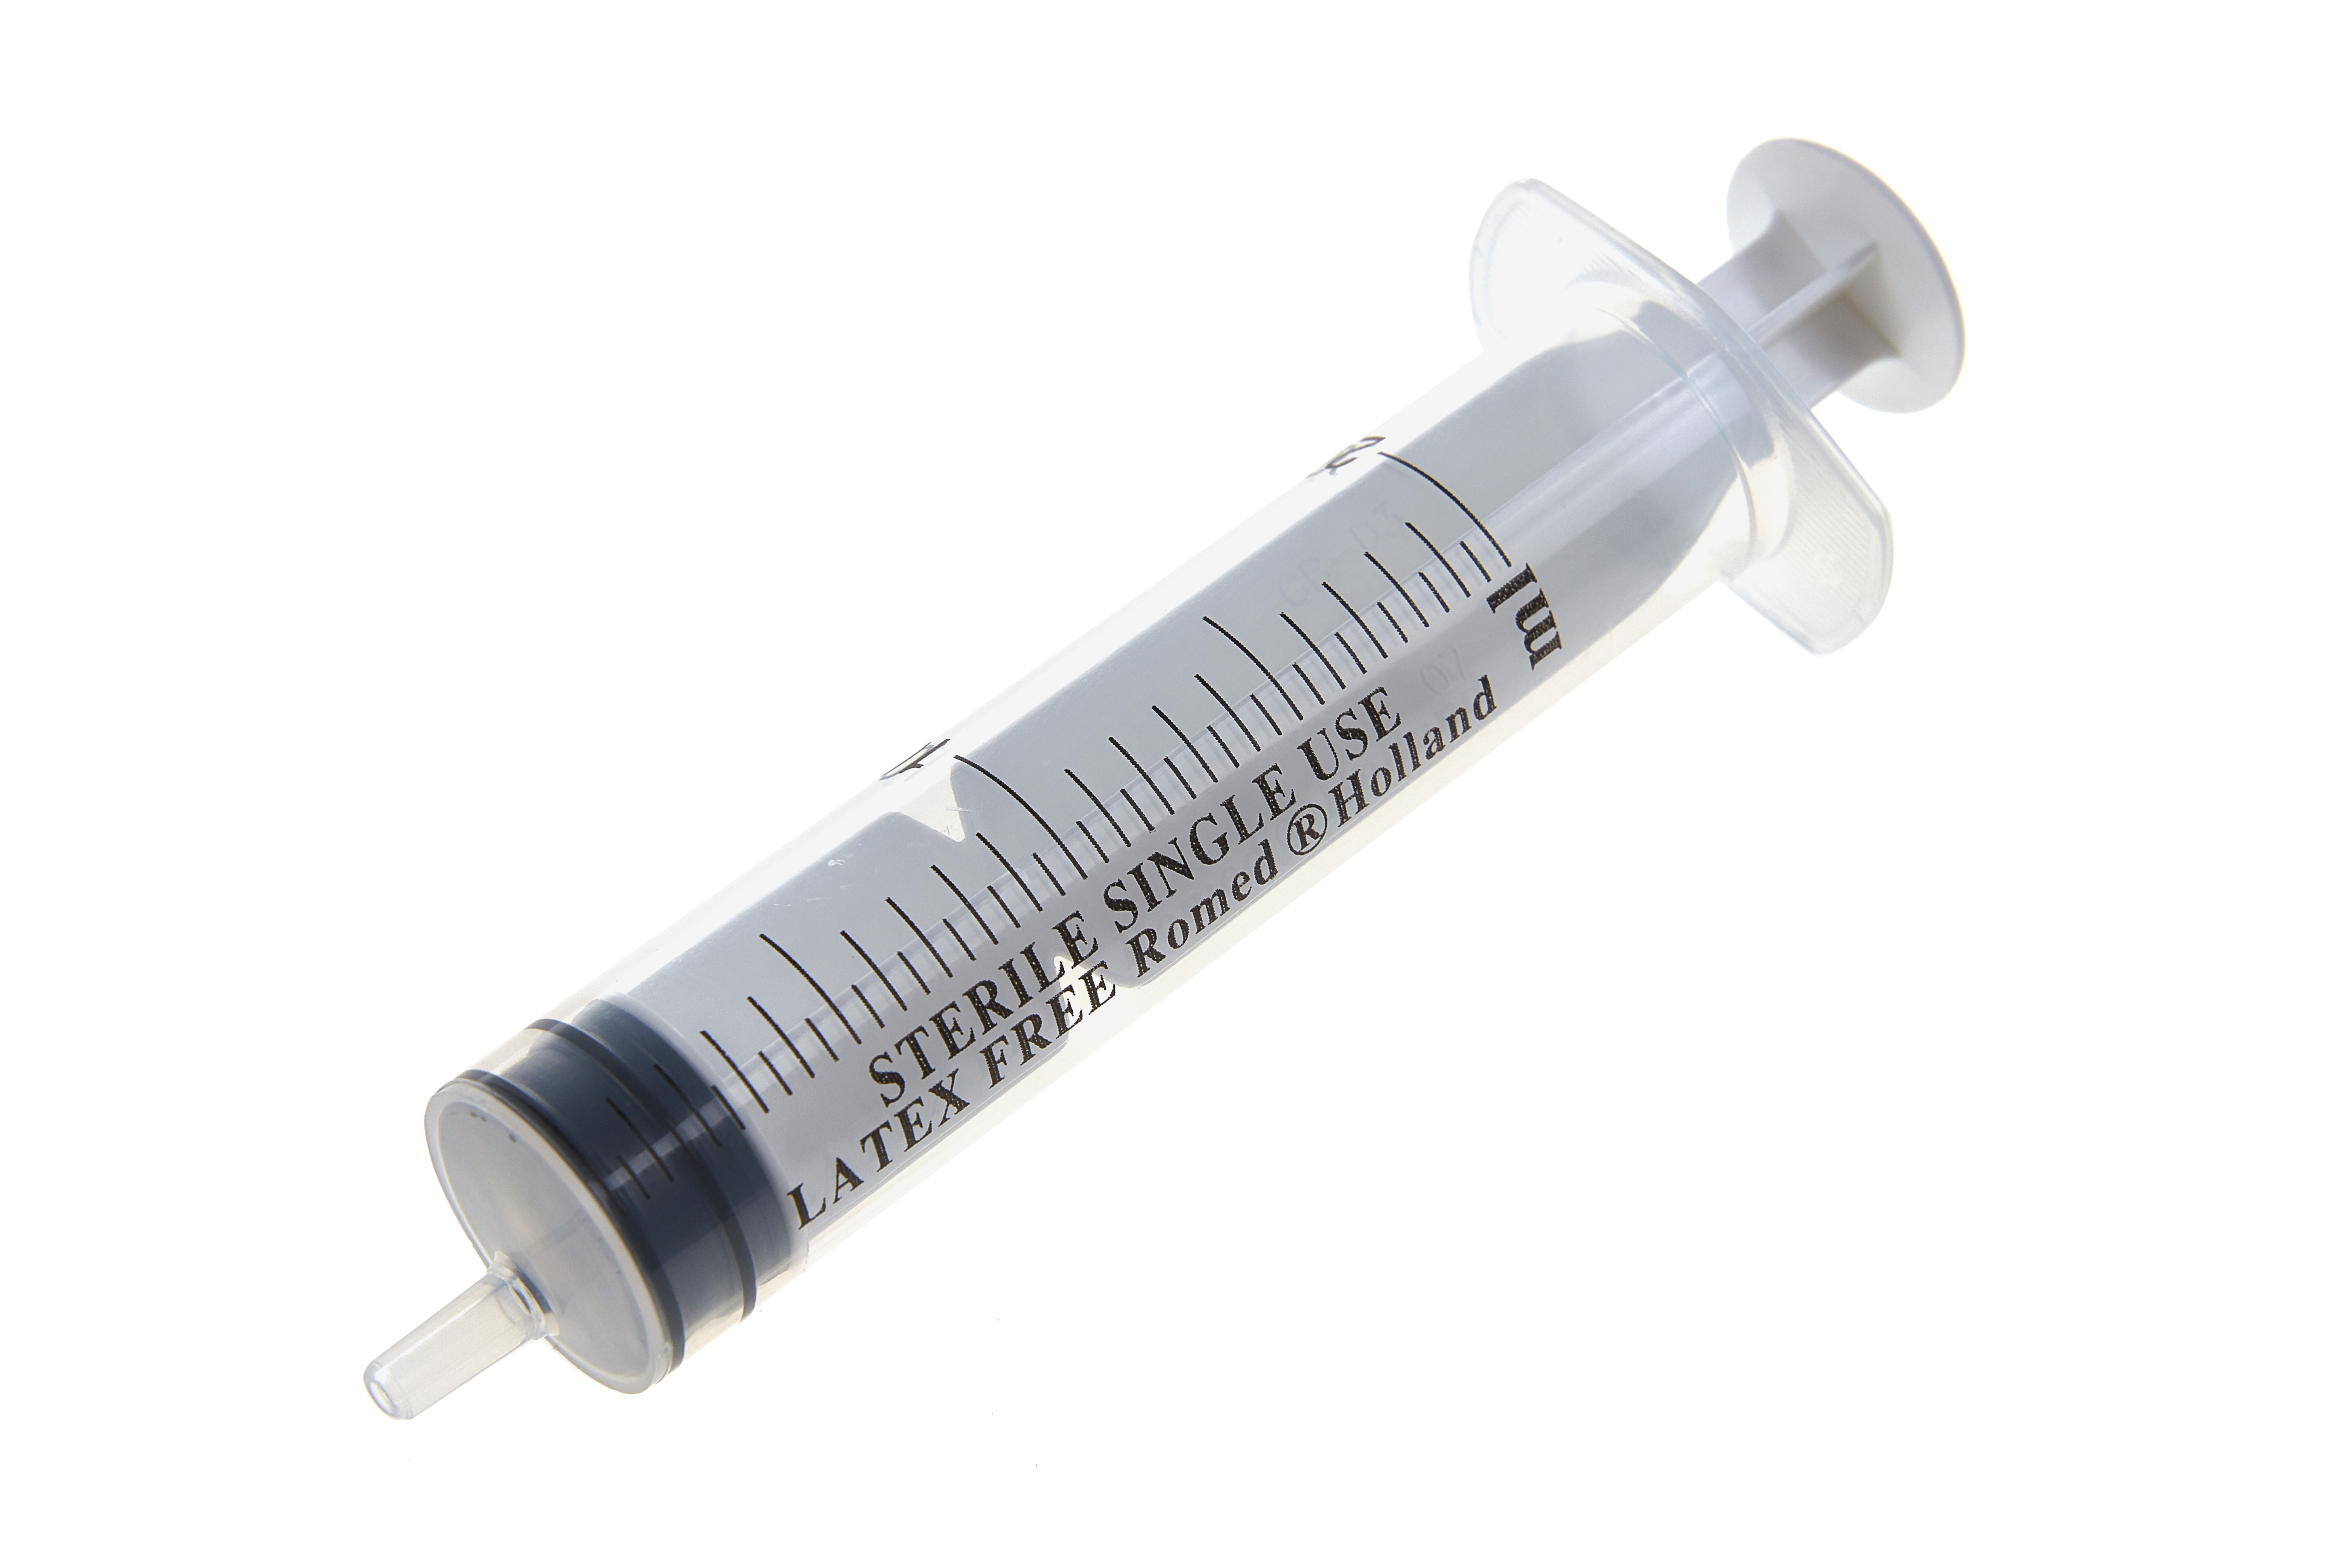 3SYR-20ML Romed 3-part syringes 20ml, without needle, sterile per piece, 50 pcs in an inner box, 16 x 50 pcs = 800 pcs in a carton.